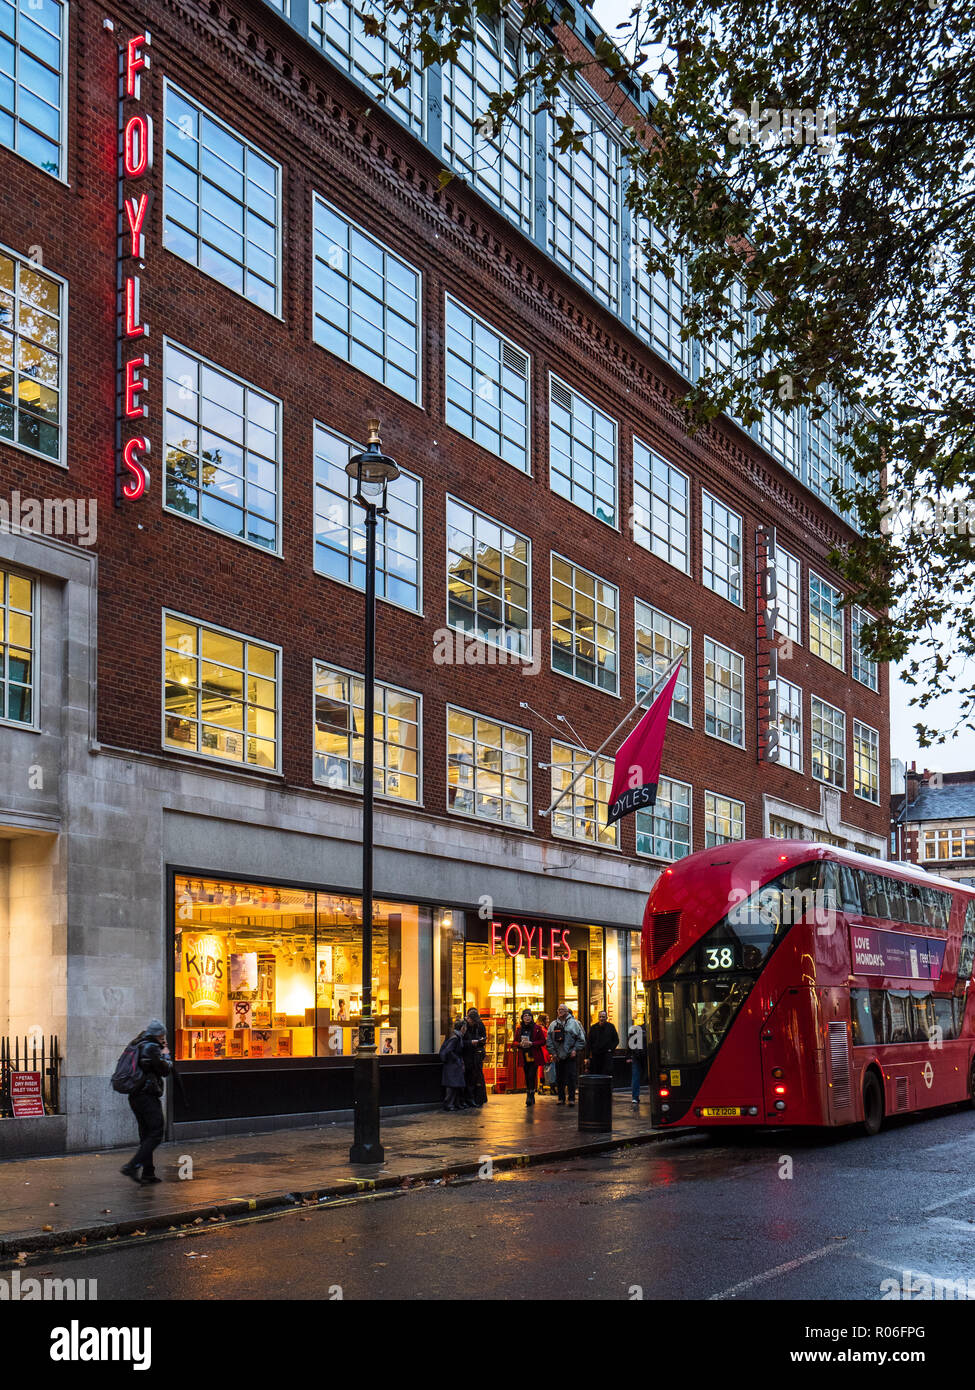 Foyles bookshop bookstore in Charing Cross Road in central London UK. Foyles was founded in 1903. Stock Photo